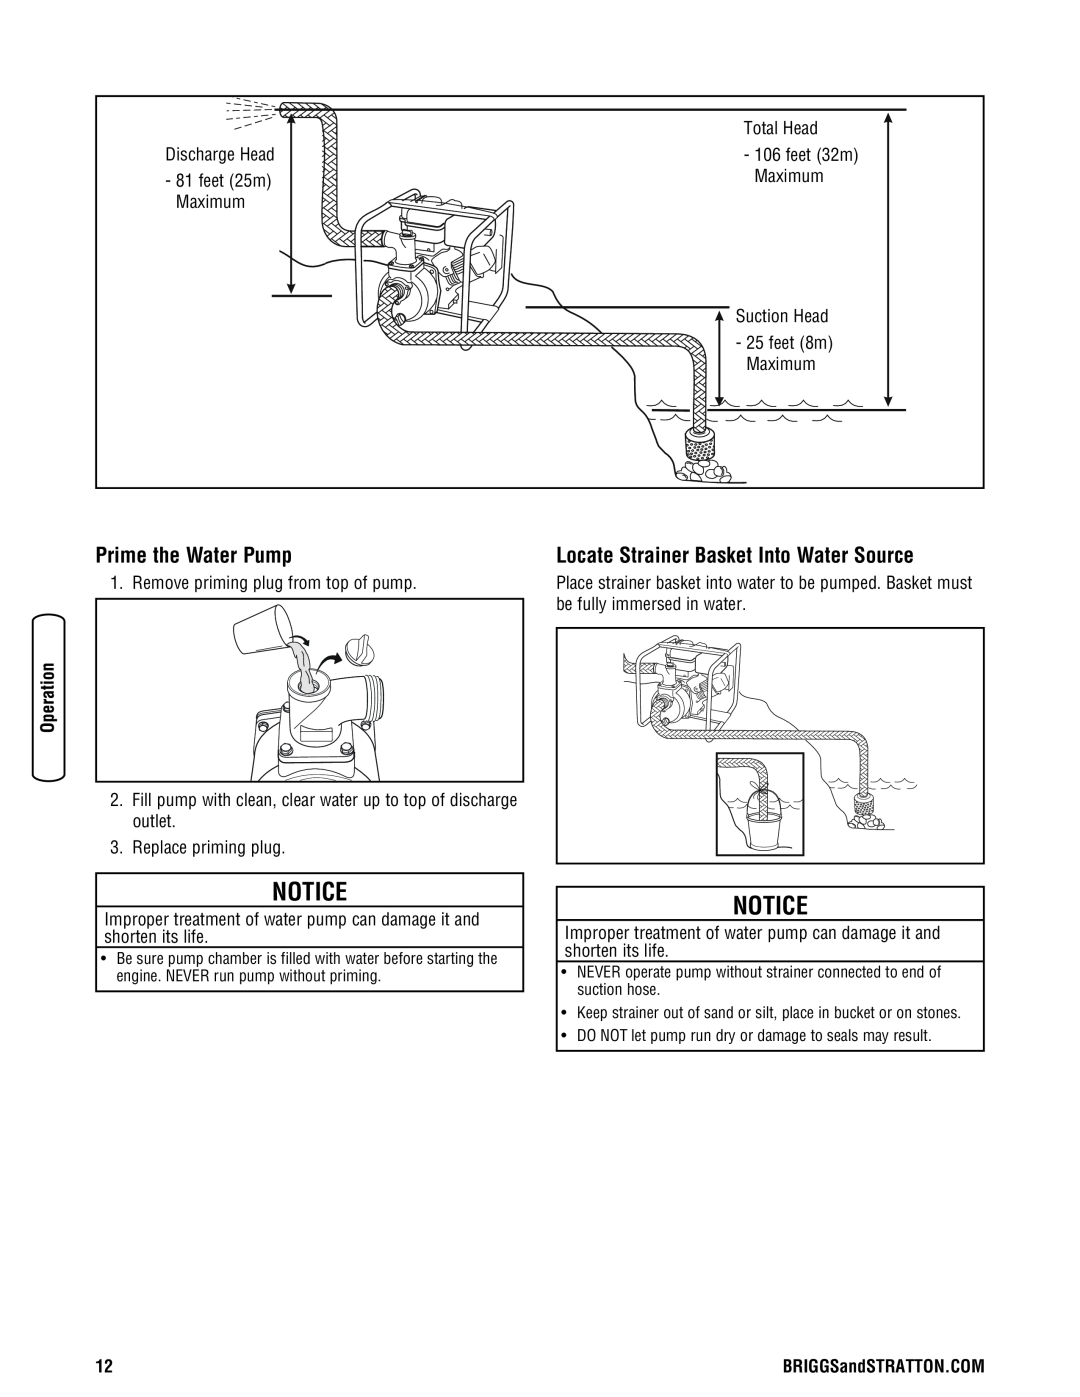 Briggs & Stratton Water Transfer Pump manual Prime the Water Pump, Locate Strainer Basket Into Water Source 